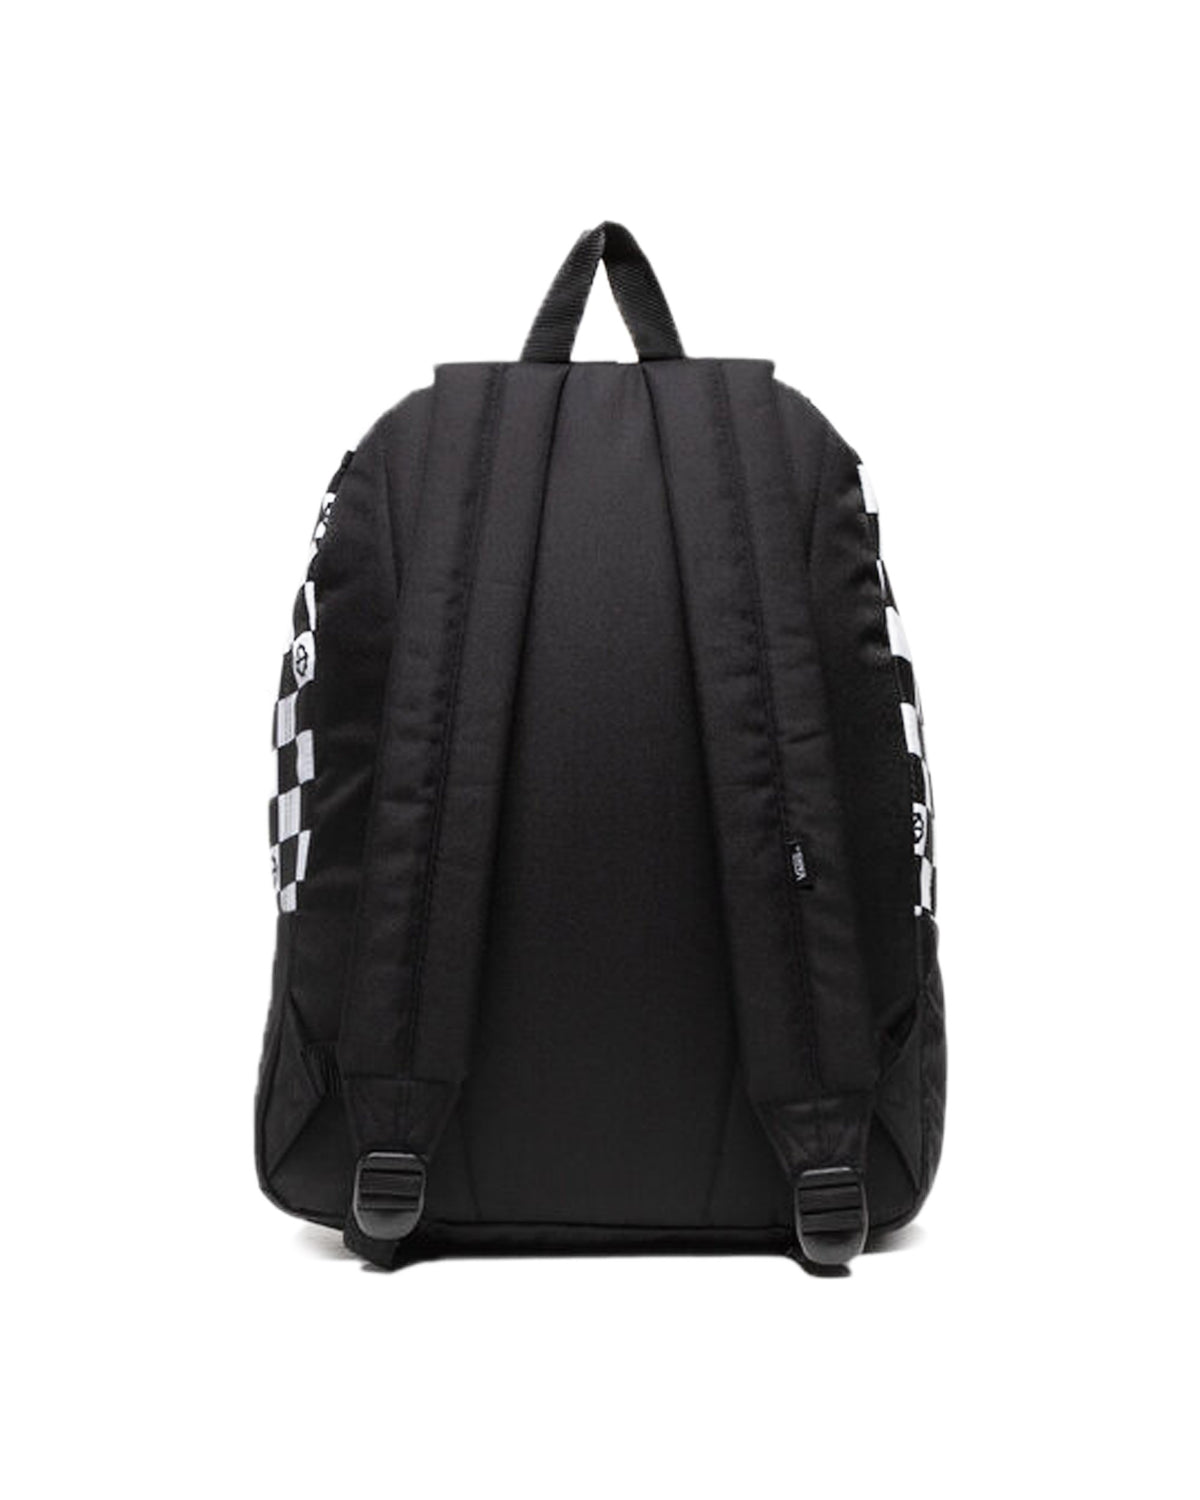 Vans Realm Backpack Peace Check Black